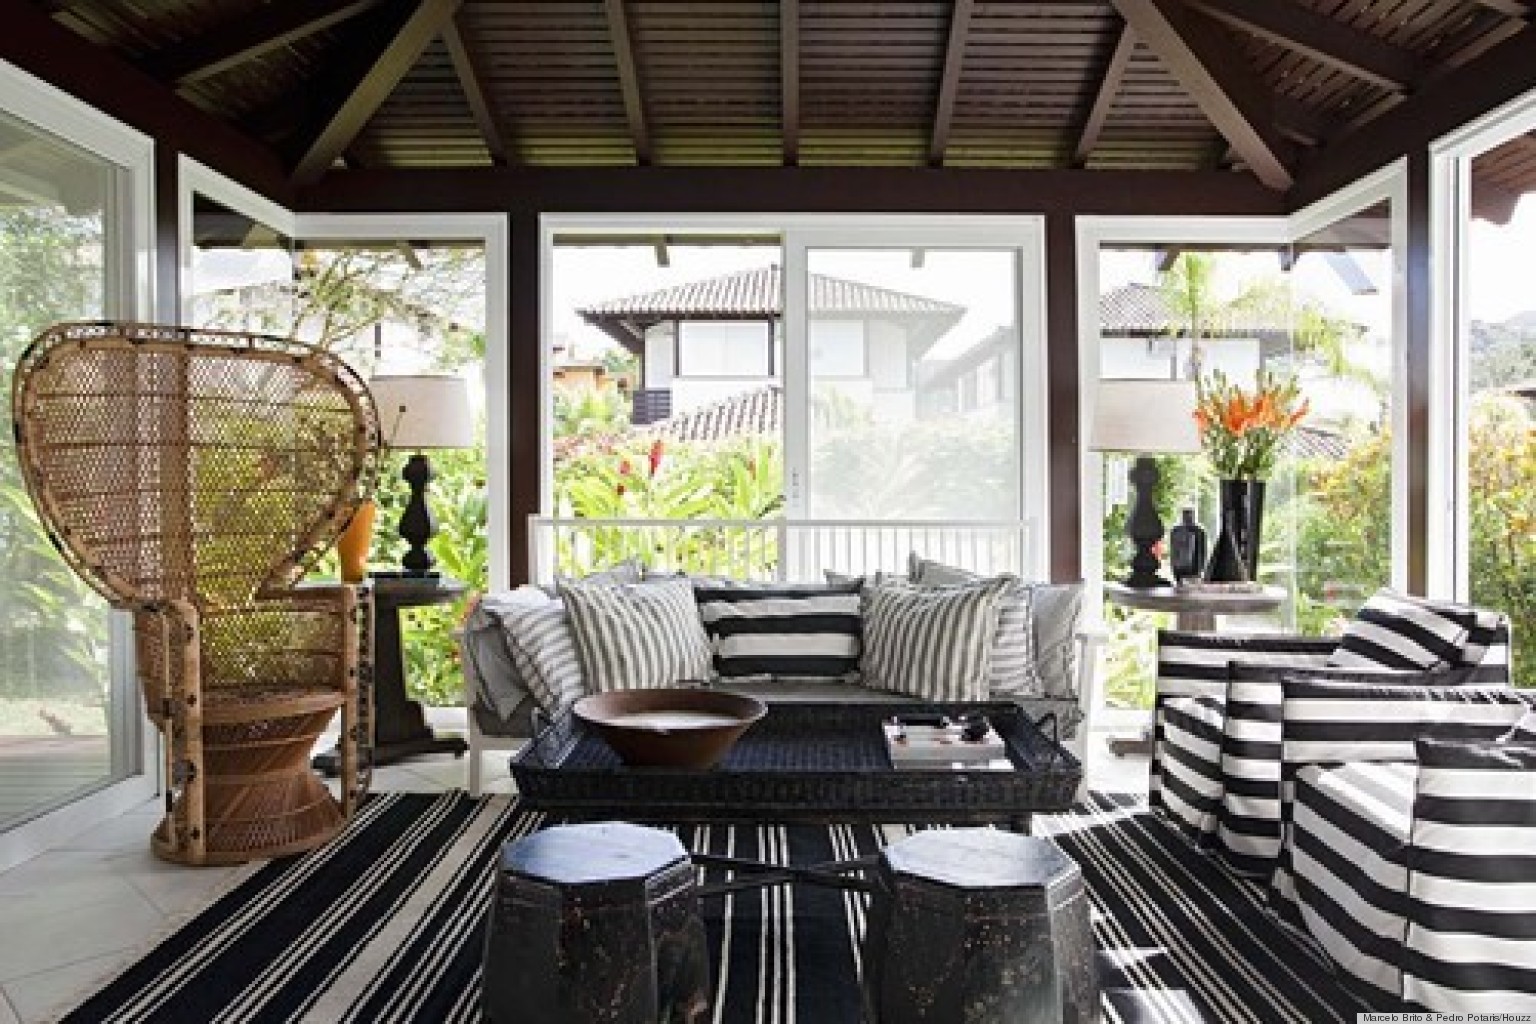 10 Impressive Sunrooms That We Need To Sip Lemonade In... Now (PHOTOS